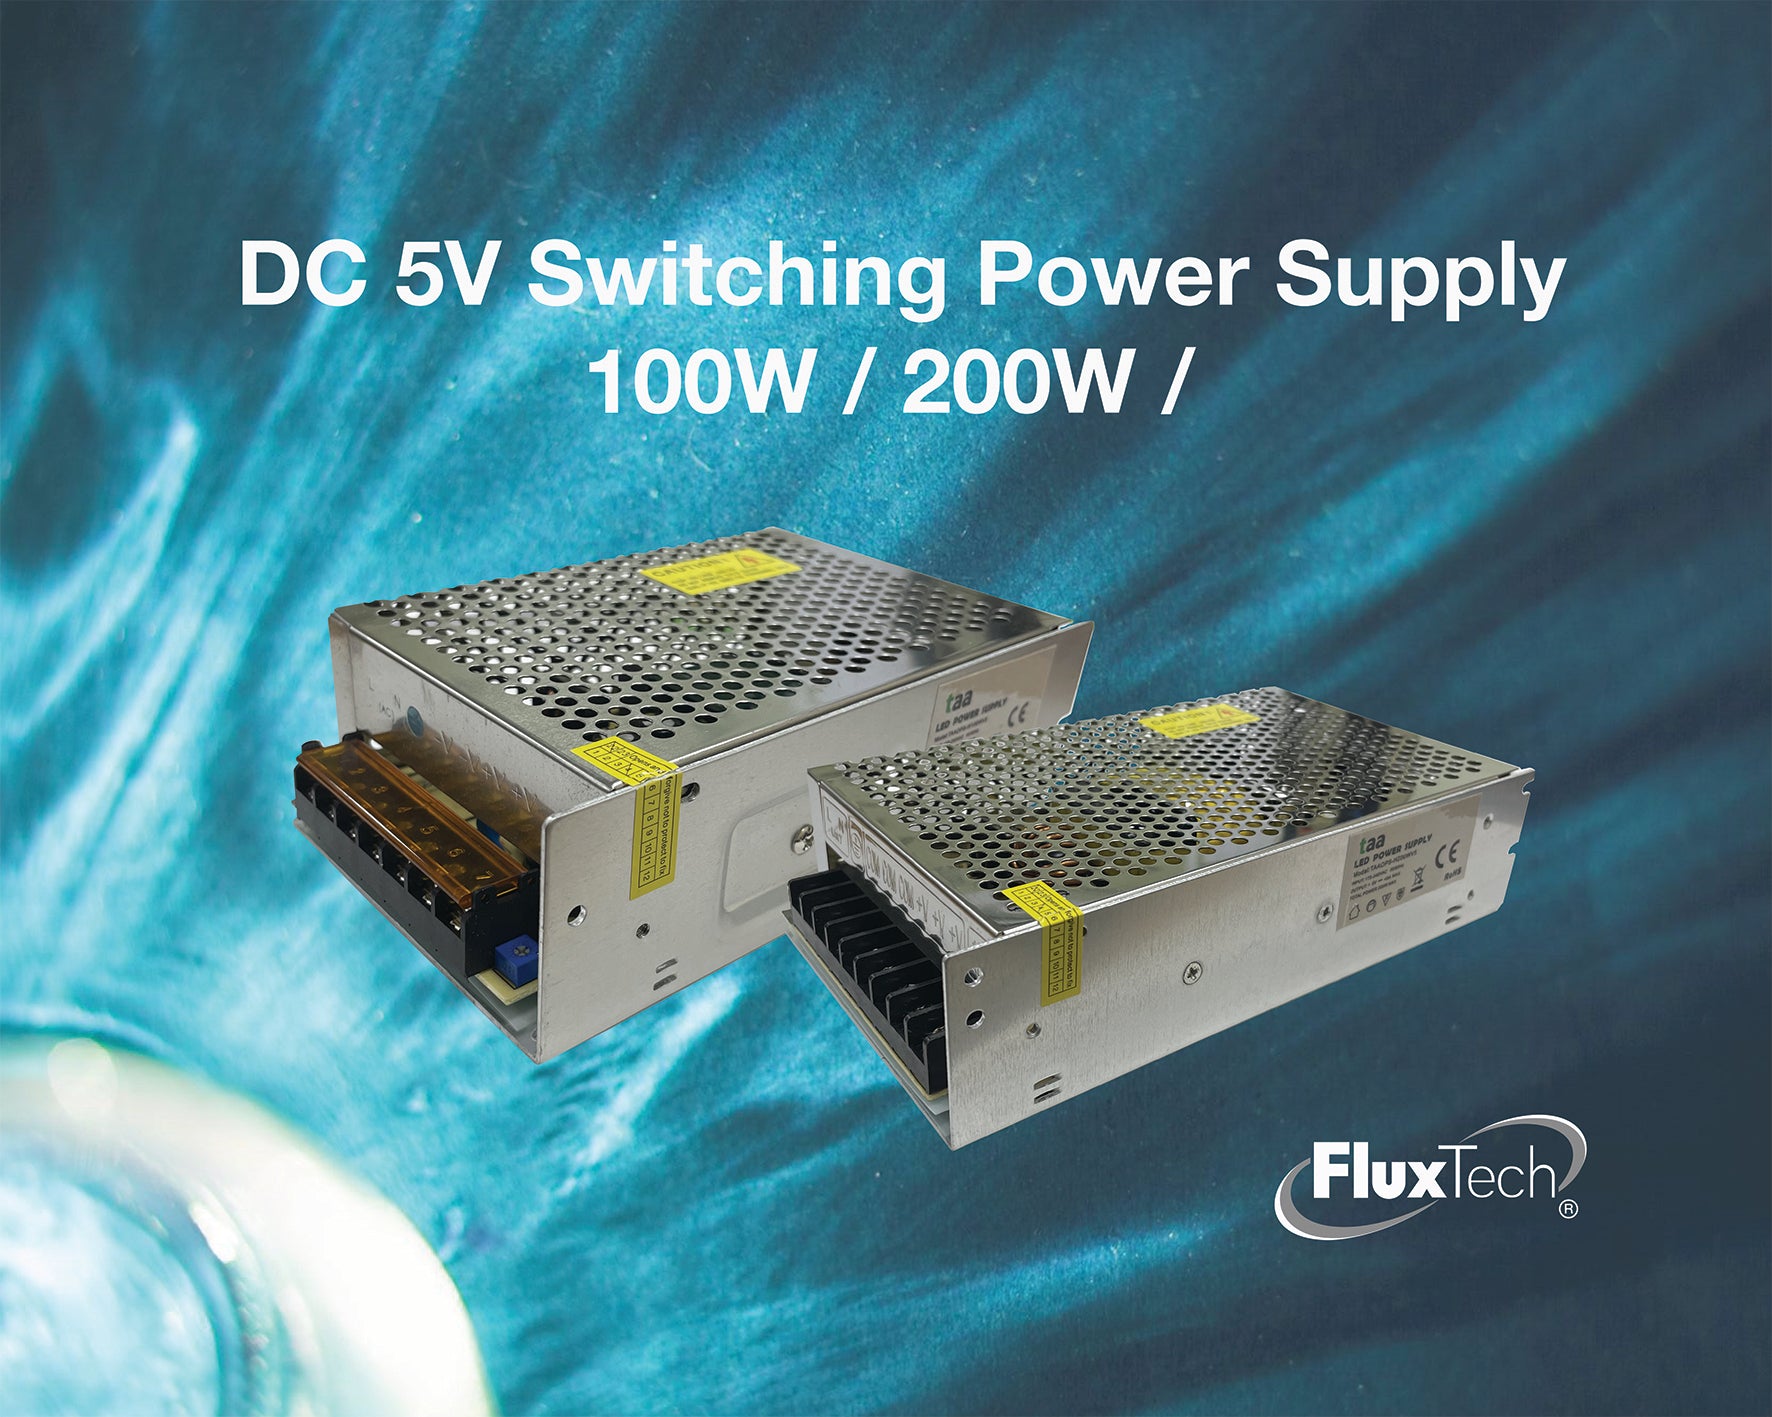 FluxTech - 5V DC Switching Power Supply Driver for LED Strips Light